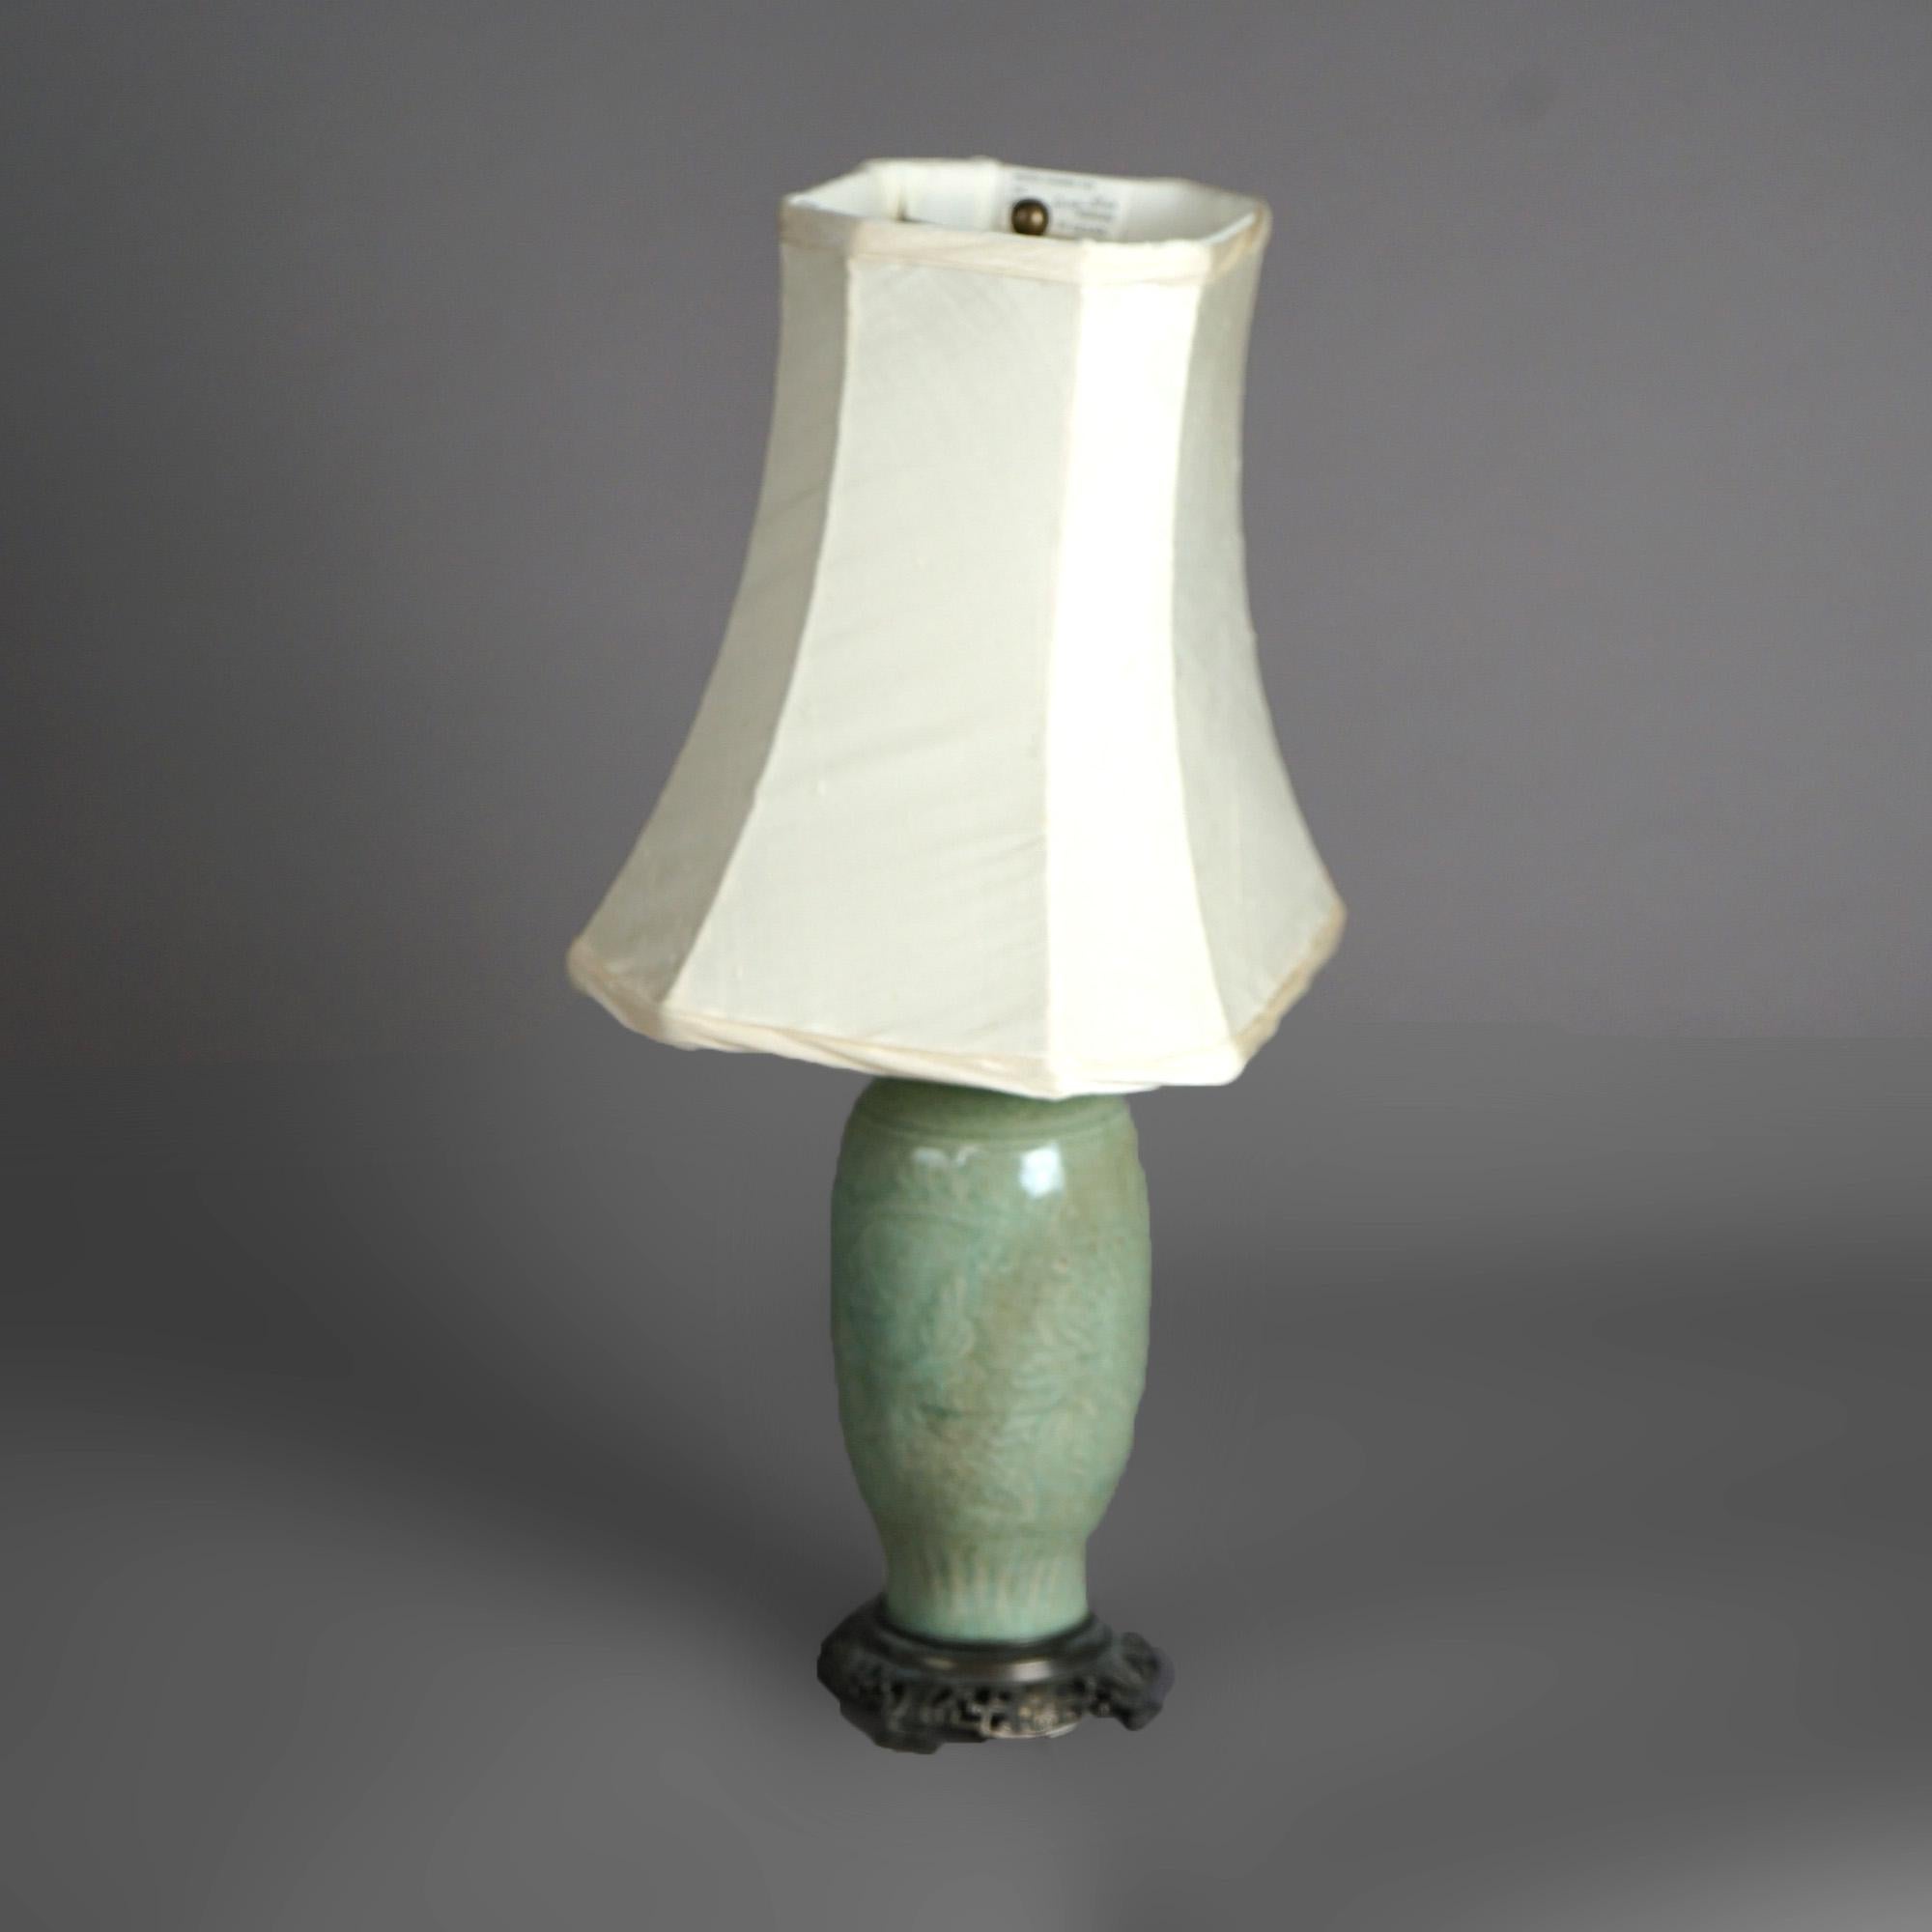 American Antique Chinese Celadon Glazed Art Pottery Table Lamp C1930